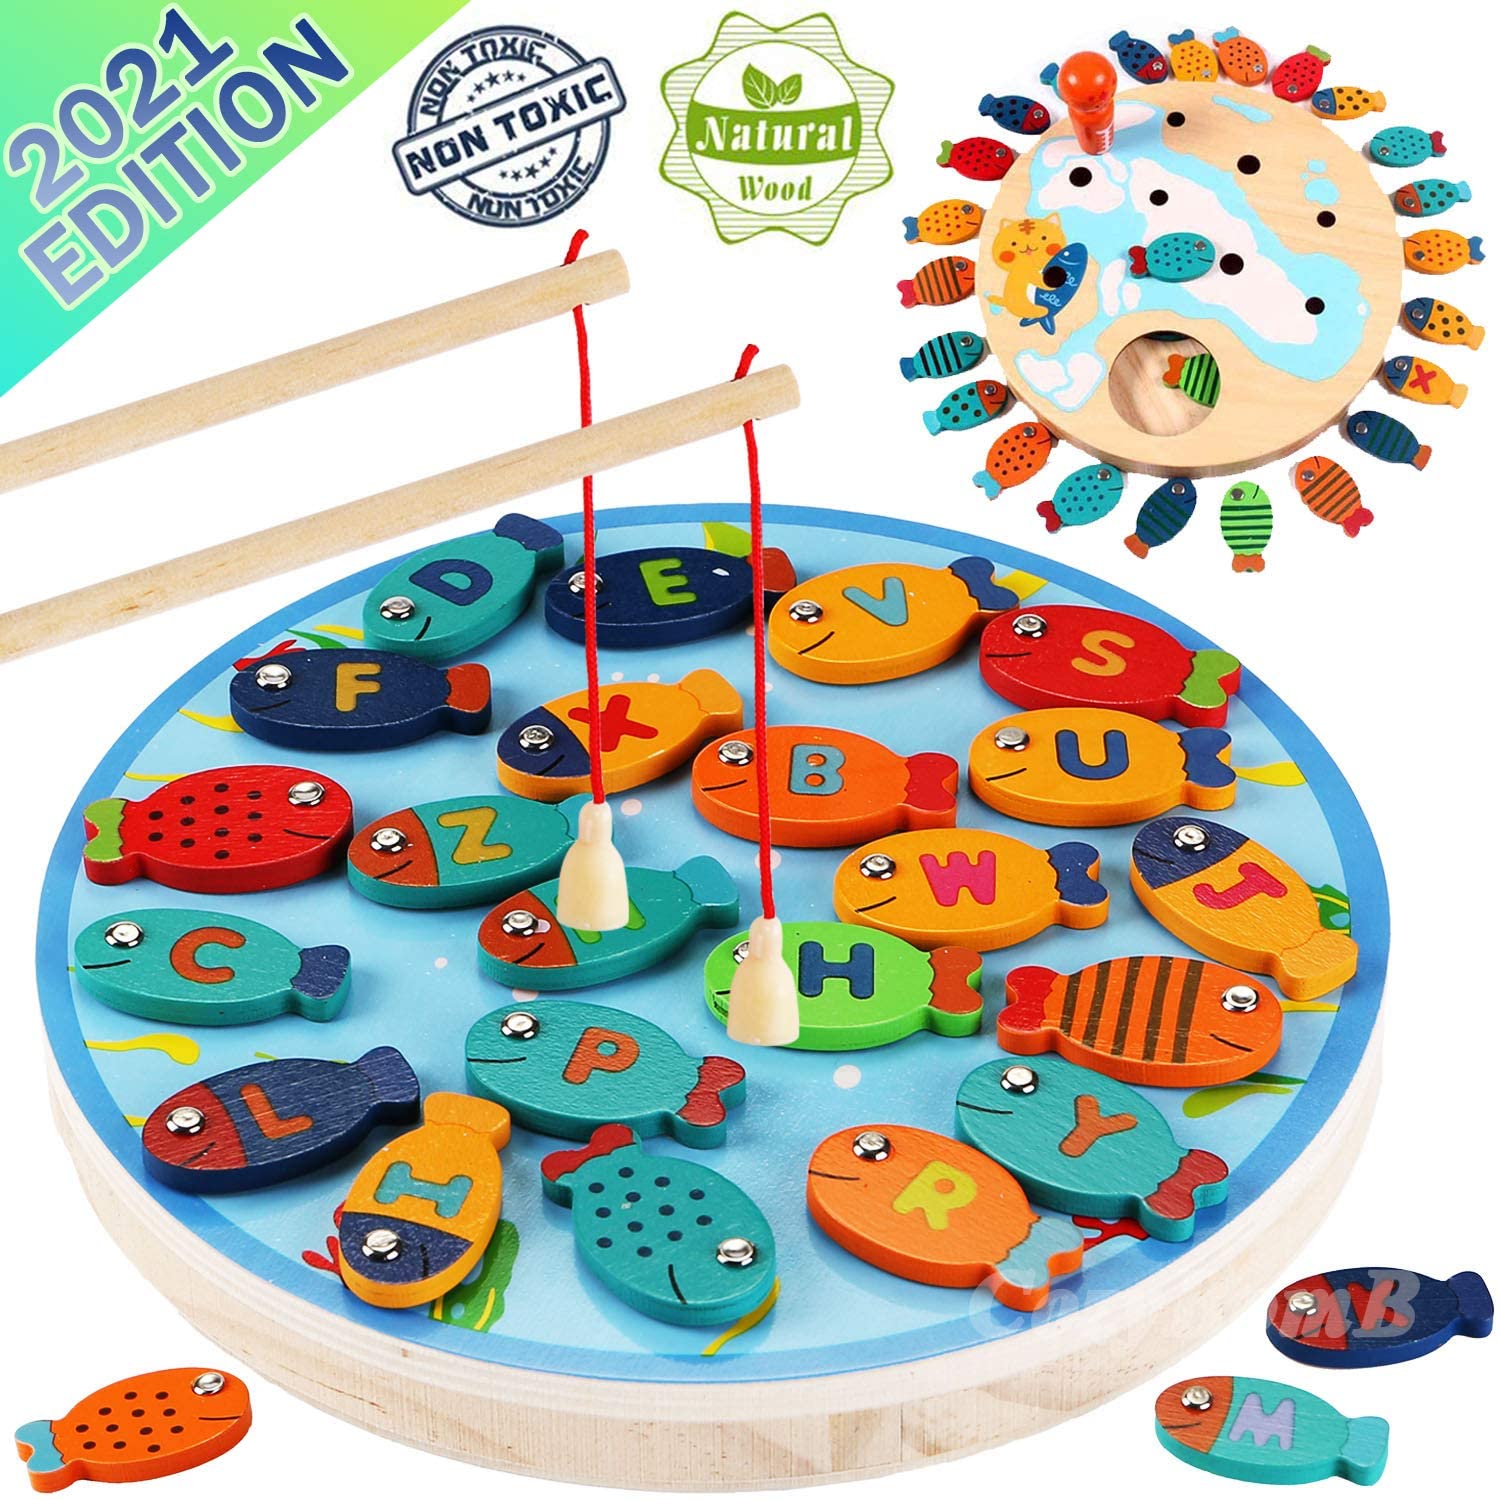 Toddler Montessori Toy Wooden Fishing Game for Kids 1 2 3 Year Old,  Preschool Educational Hand Eye Coordination Skill Activity Learning Toy for